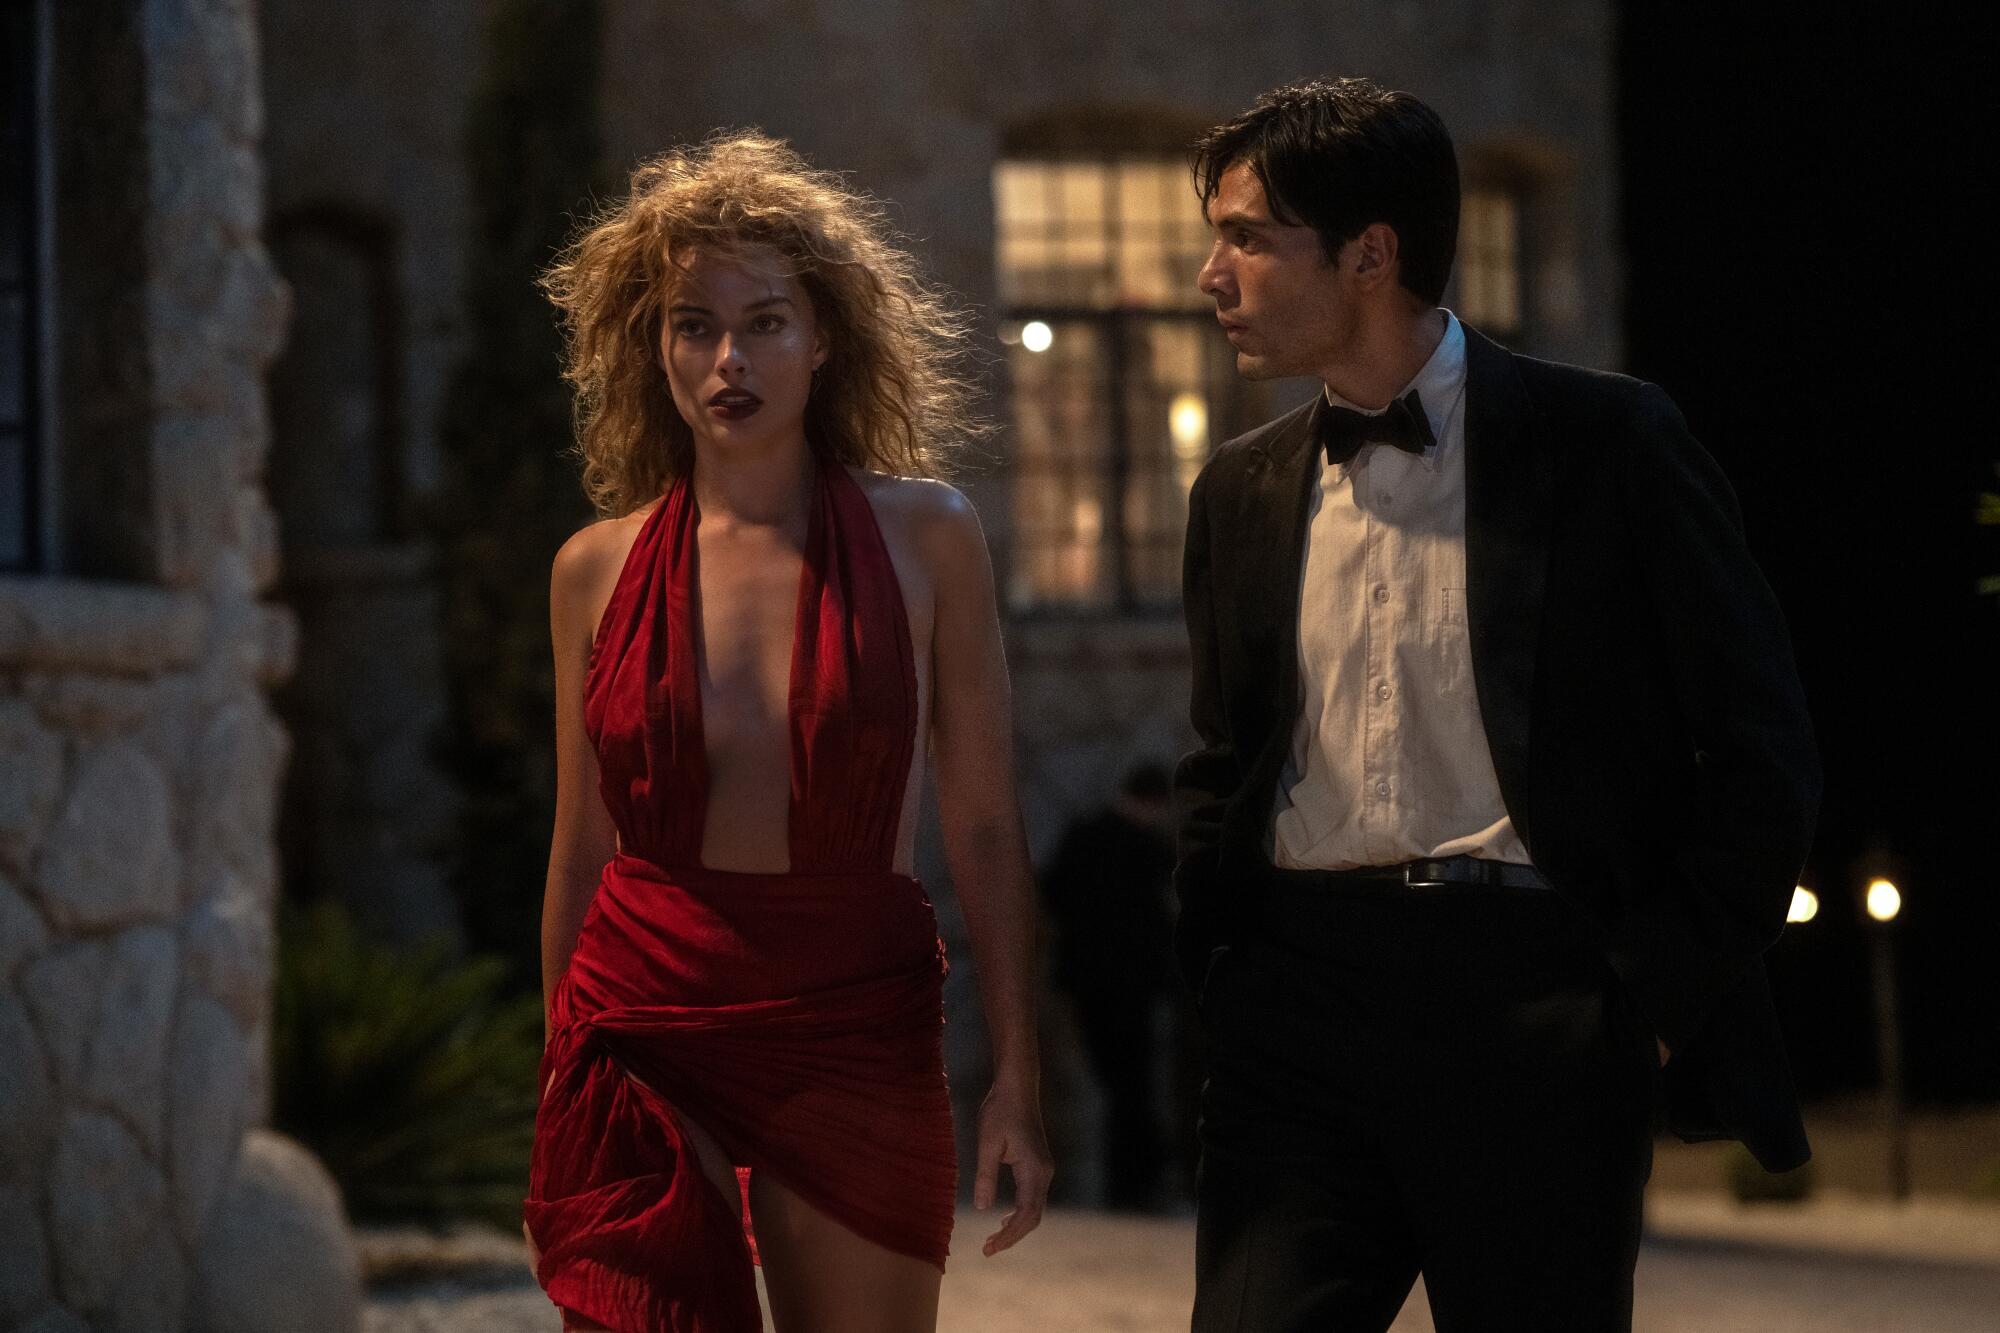 Margot Robbie as Nellie LaRoy and Diego Calva as Manny Torres walk down a street at night in a scene from "Babylon."